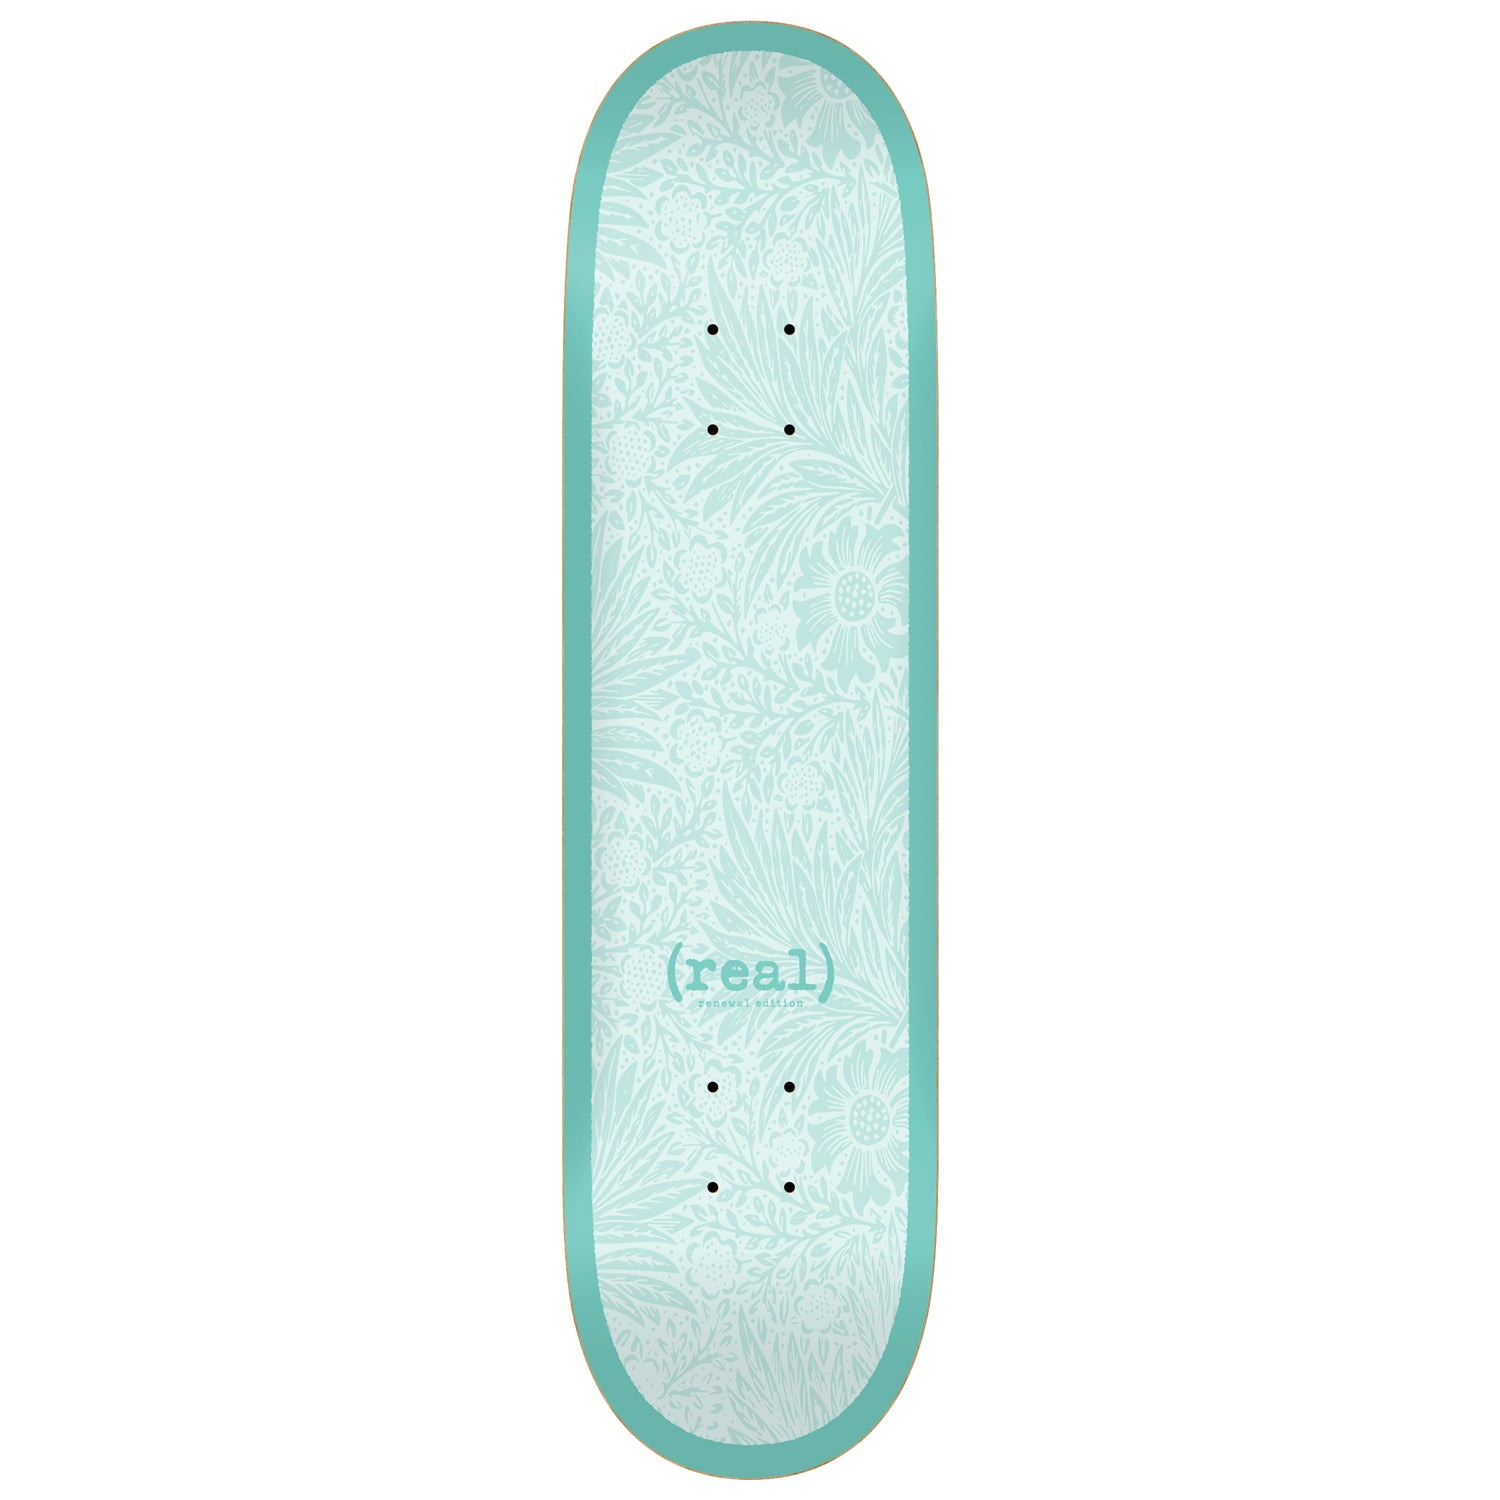 Real Flowers Renewal Price Point Deck 8.25"